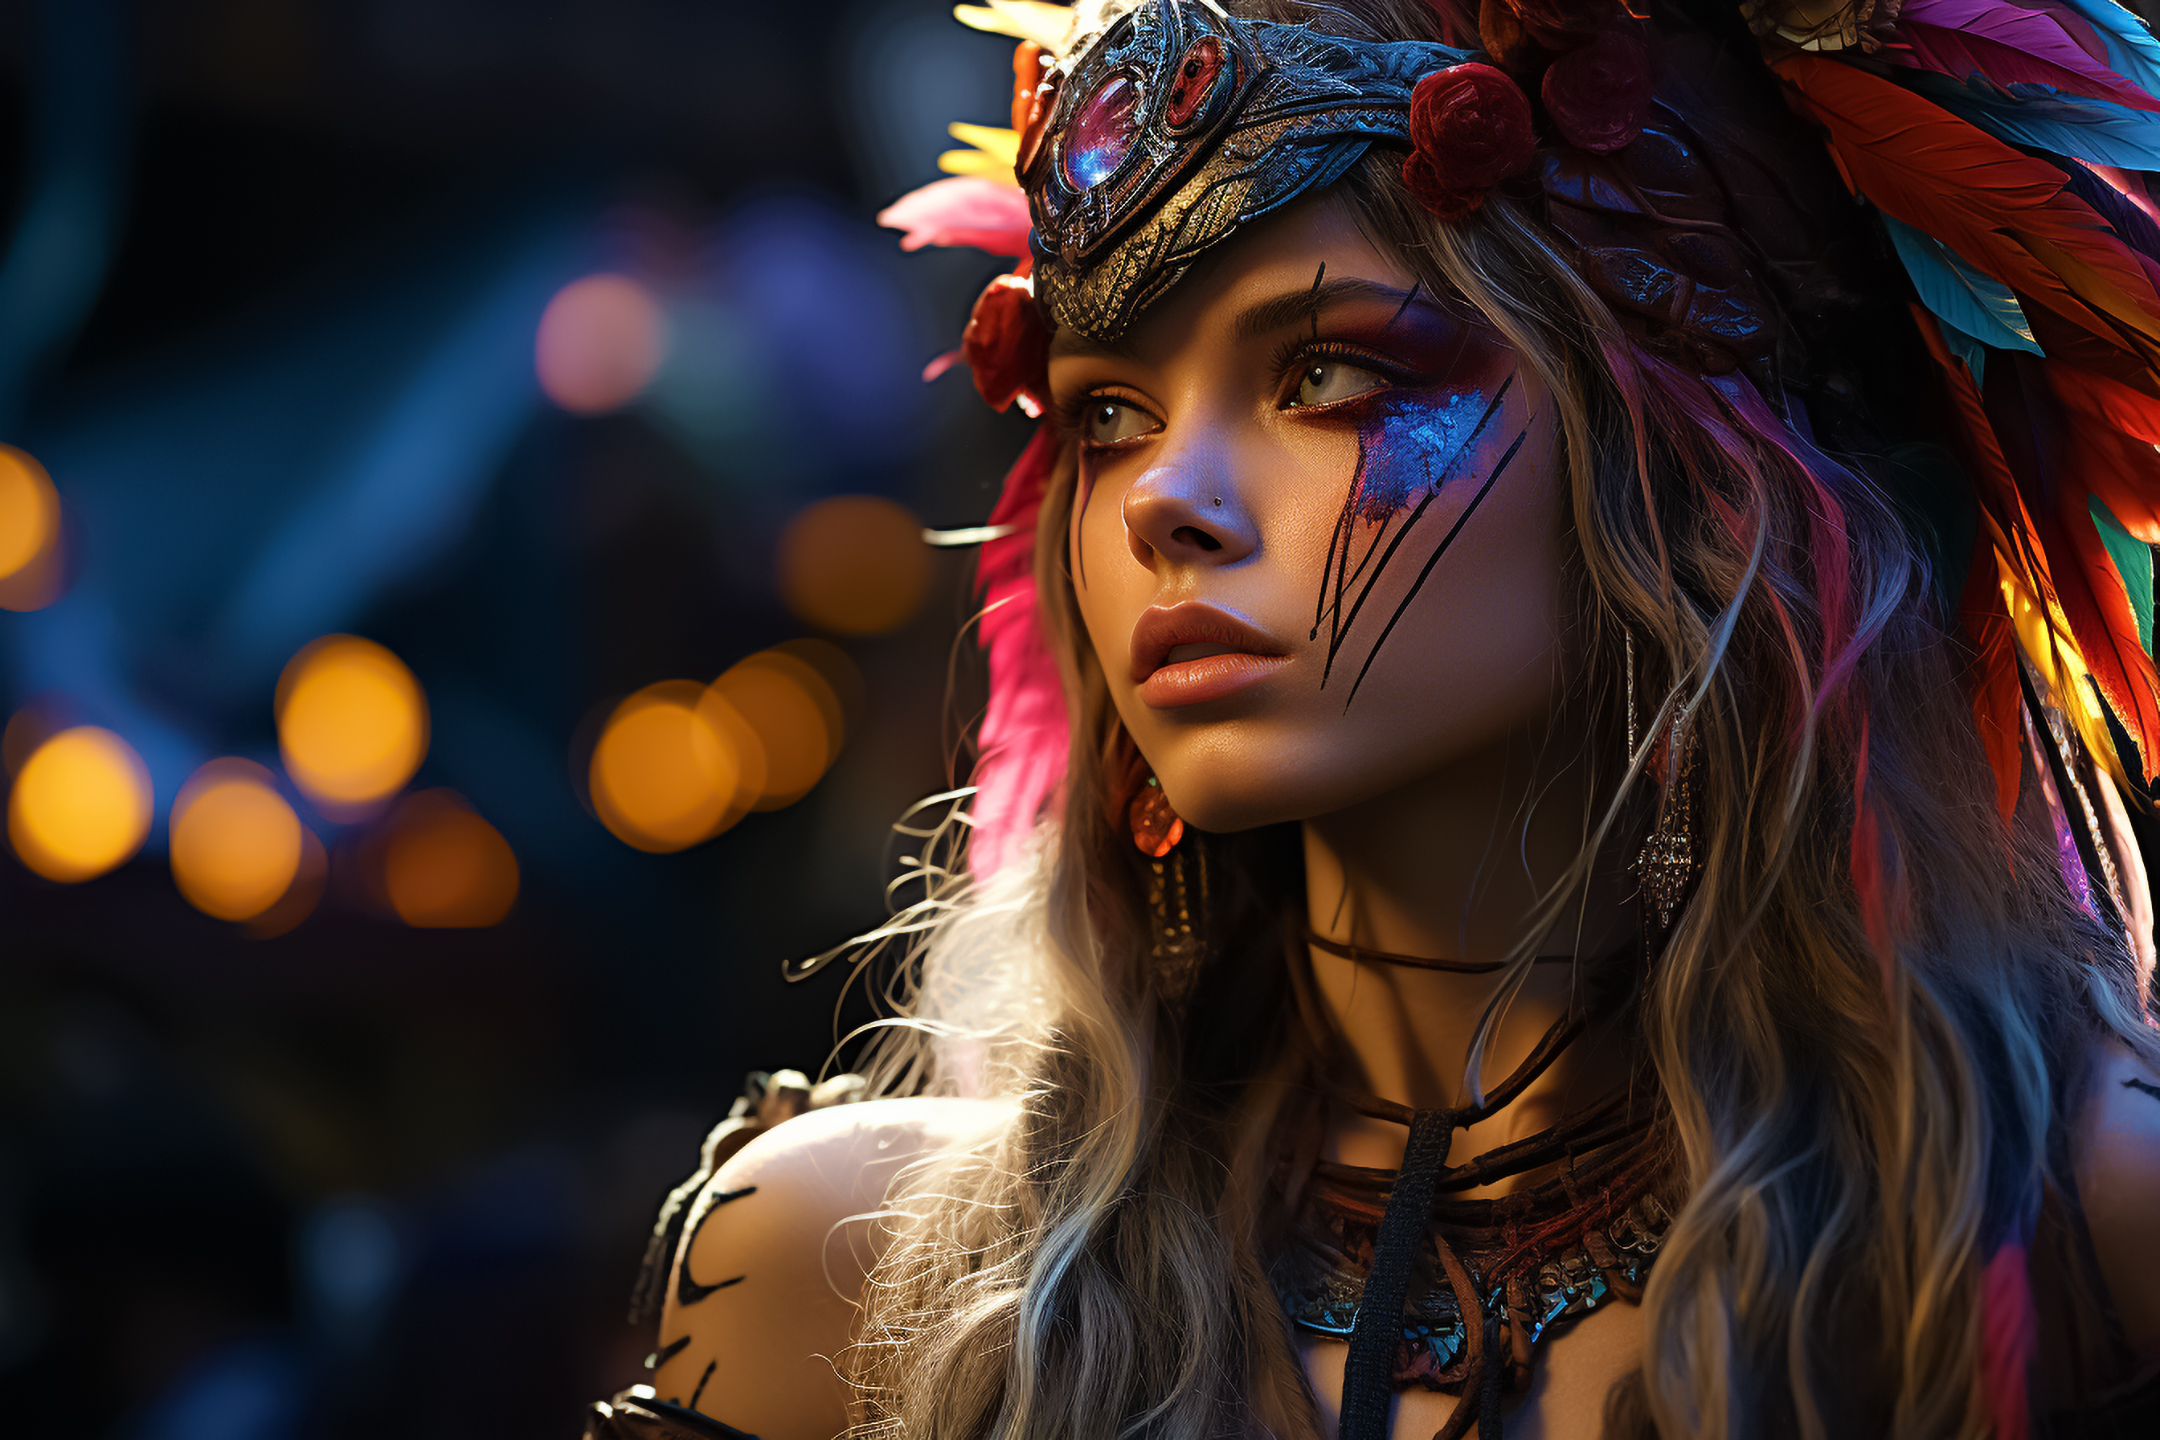 General 2160x1440 Stable Diffusion AI art portrait crown feathers colorful digital art looking away blurred blurry background long hair